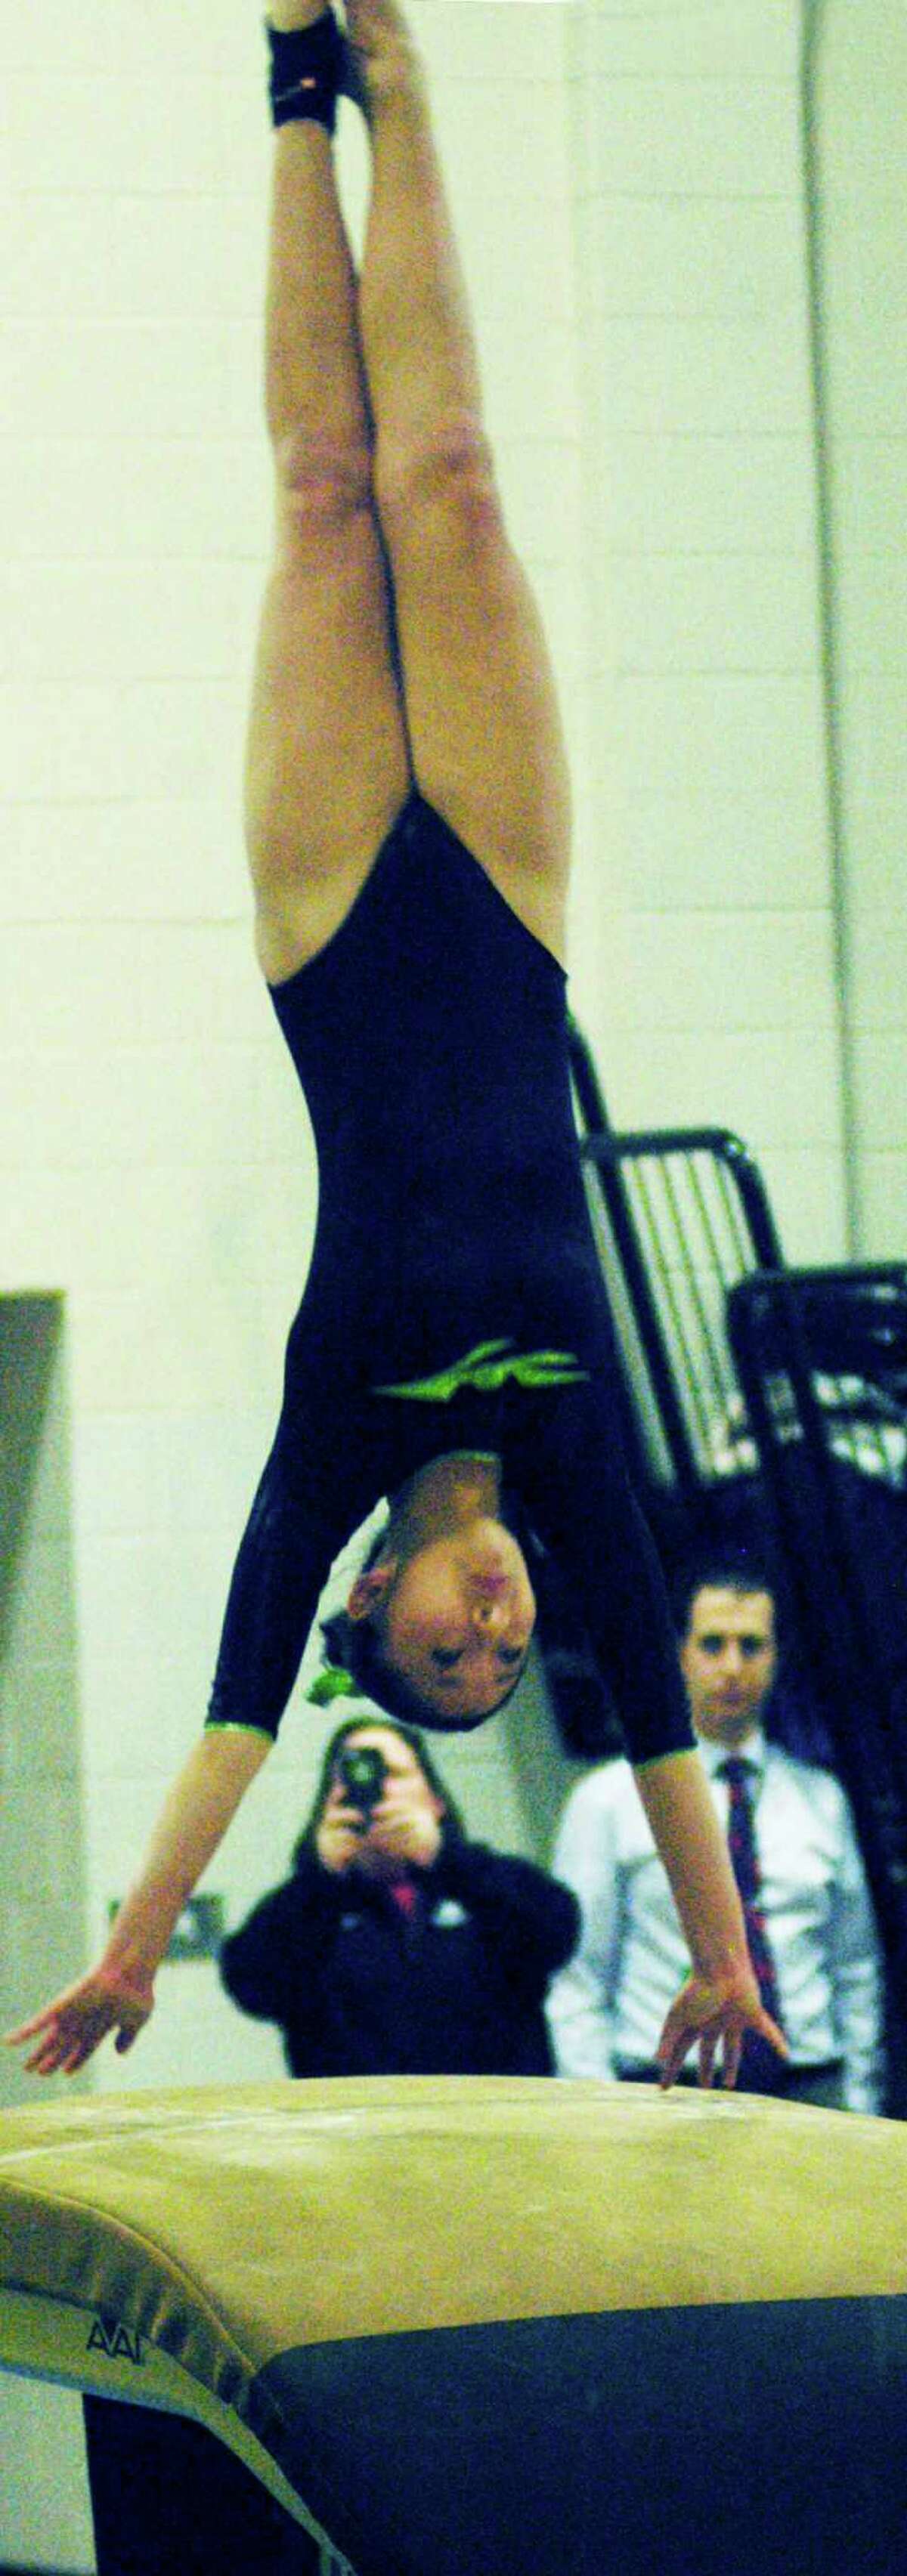 The Green Wave's Angela Lian offers a strong vault for New Miford High School gymnastics as Green Wave field hockey coach Dawn Hough captures the moment and NMHS assistant principal Mark Balanda looks on during the South-West Conference championship meet, Feb. 12, 2015 at NMHS.